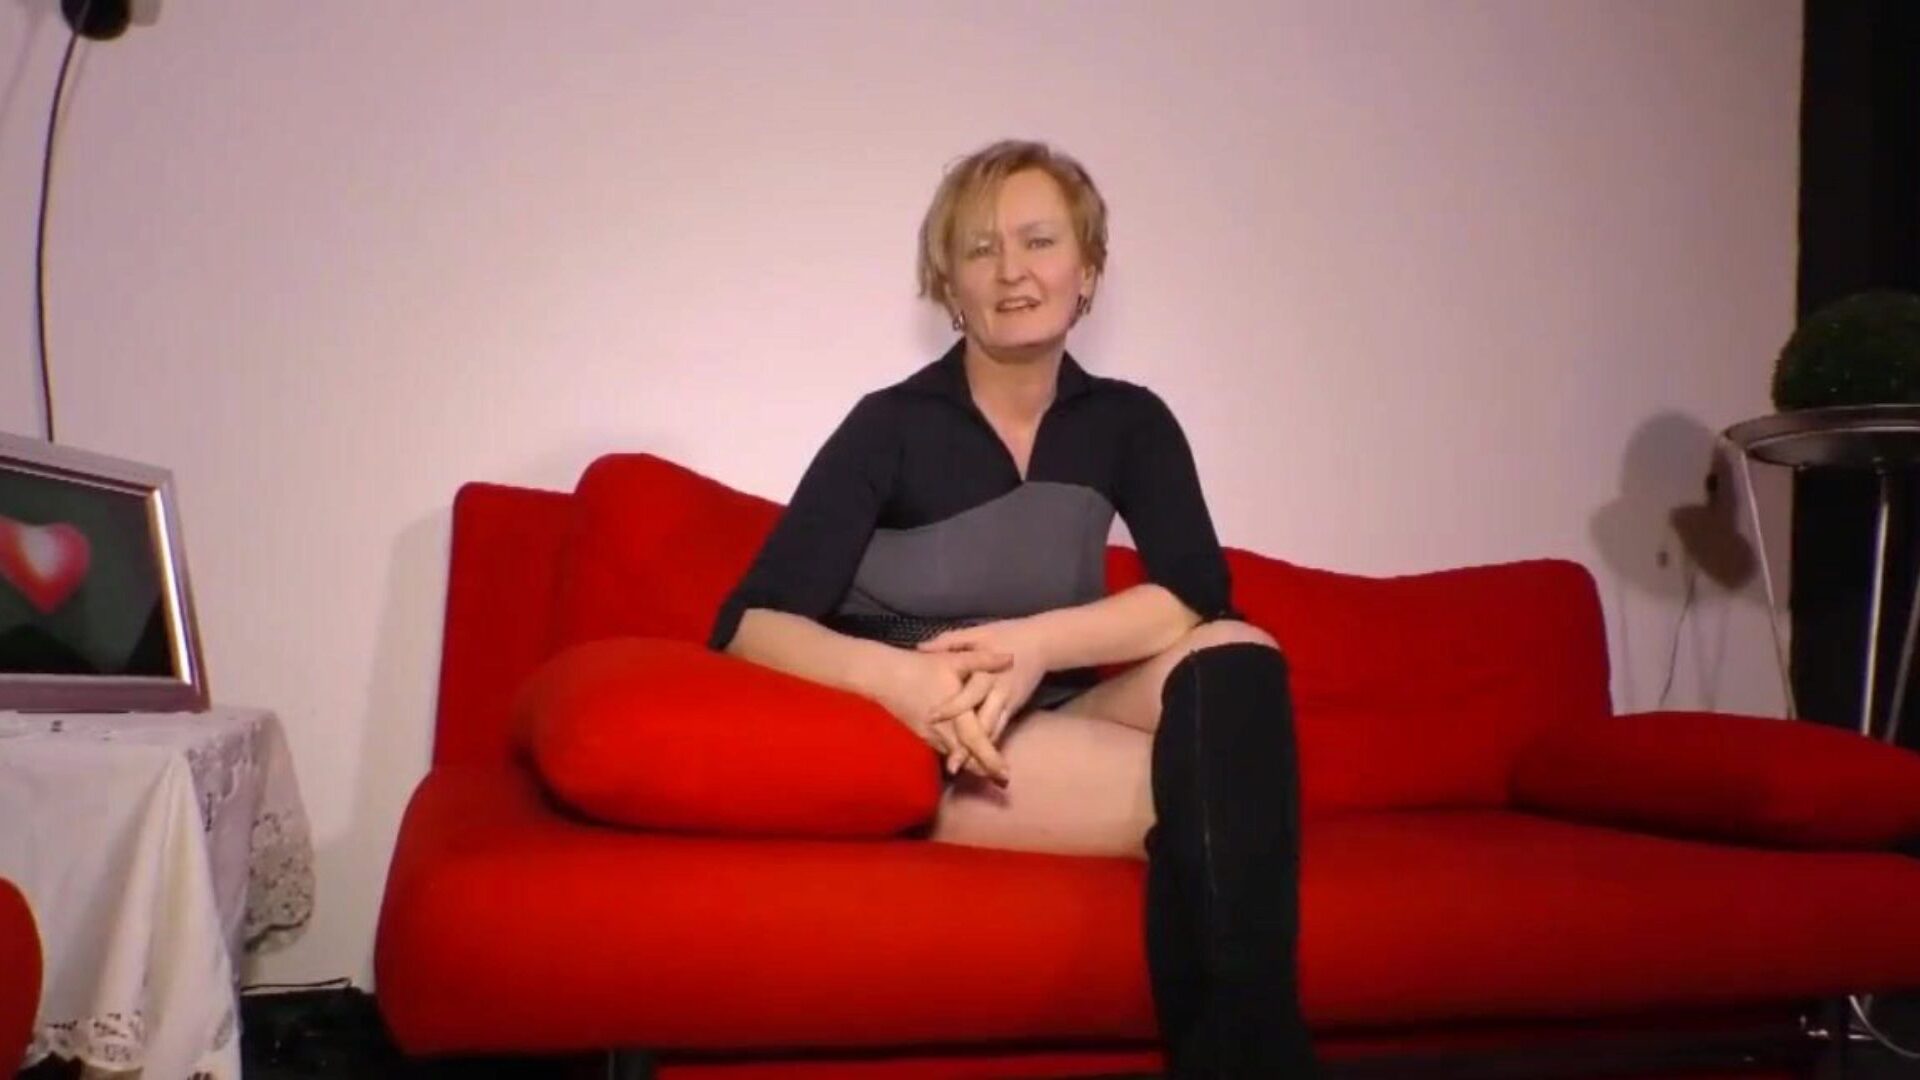 tante gerda auf der besetzungs couch geht doch: hd porn 0a watch tante gerda auf der besetzungs couch geht doch episode on xhamster - the ultimate database of free-for-all German perfored nipples hd xxx porno tube epizodes